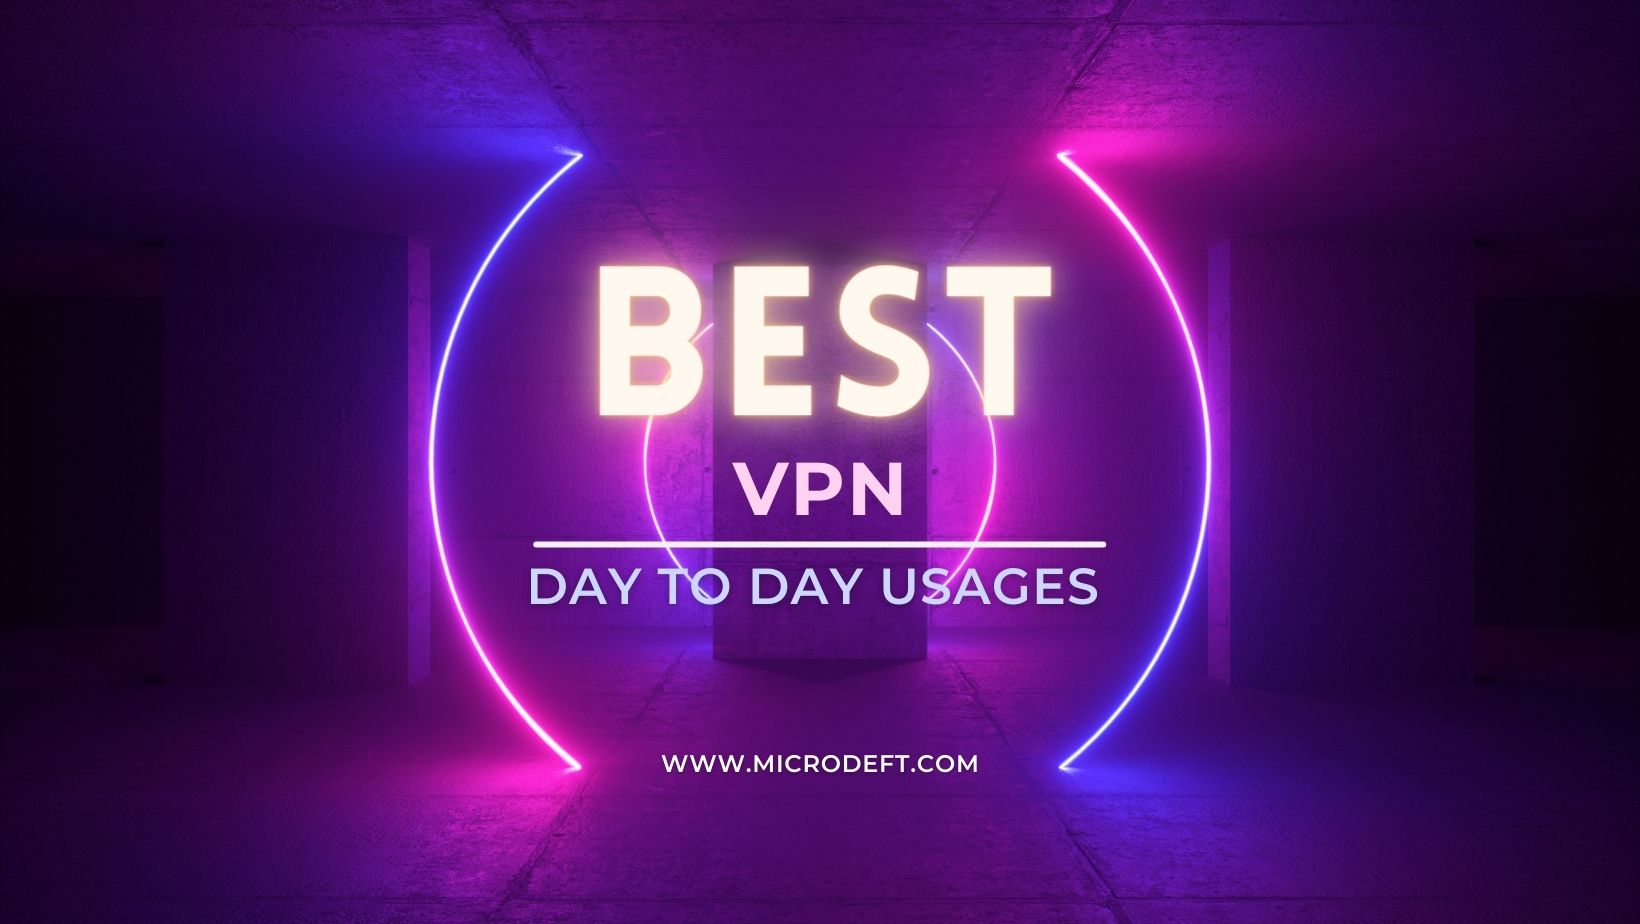 Top 5 best VPN for day to day usages